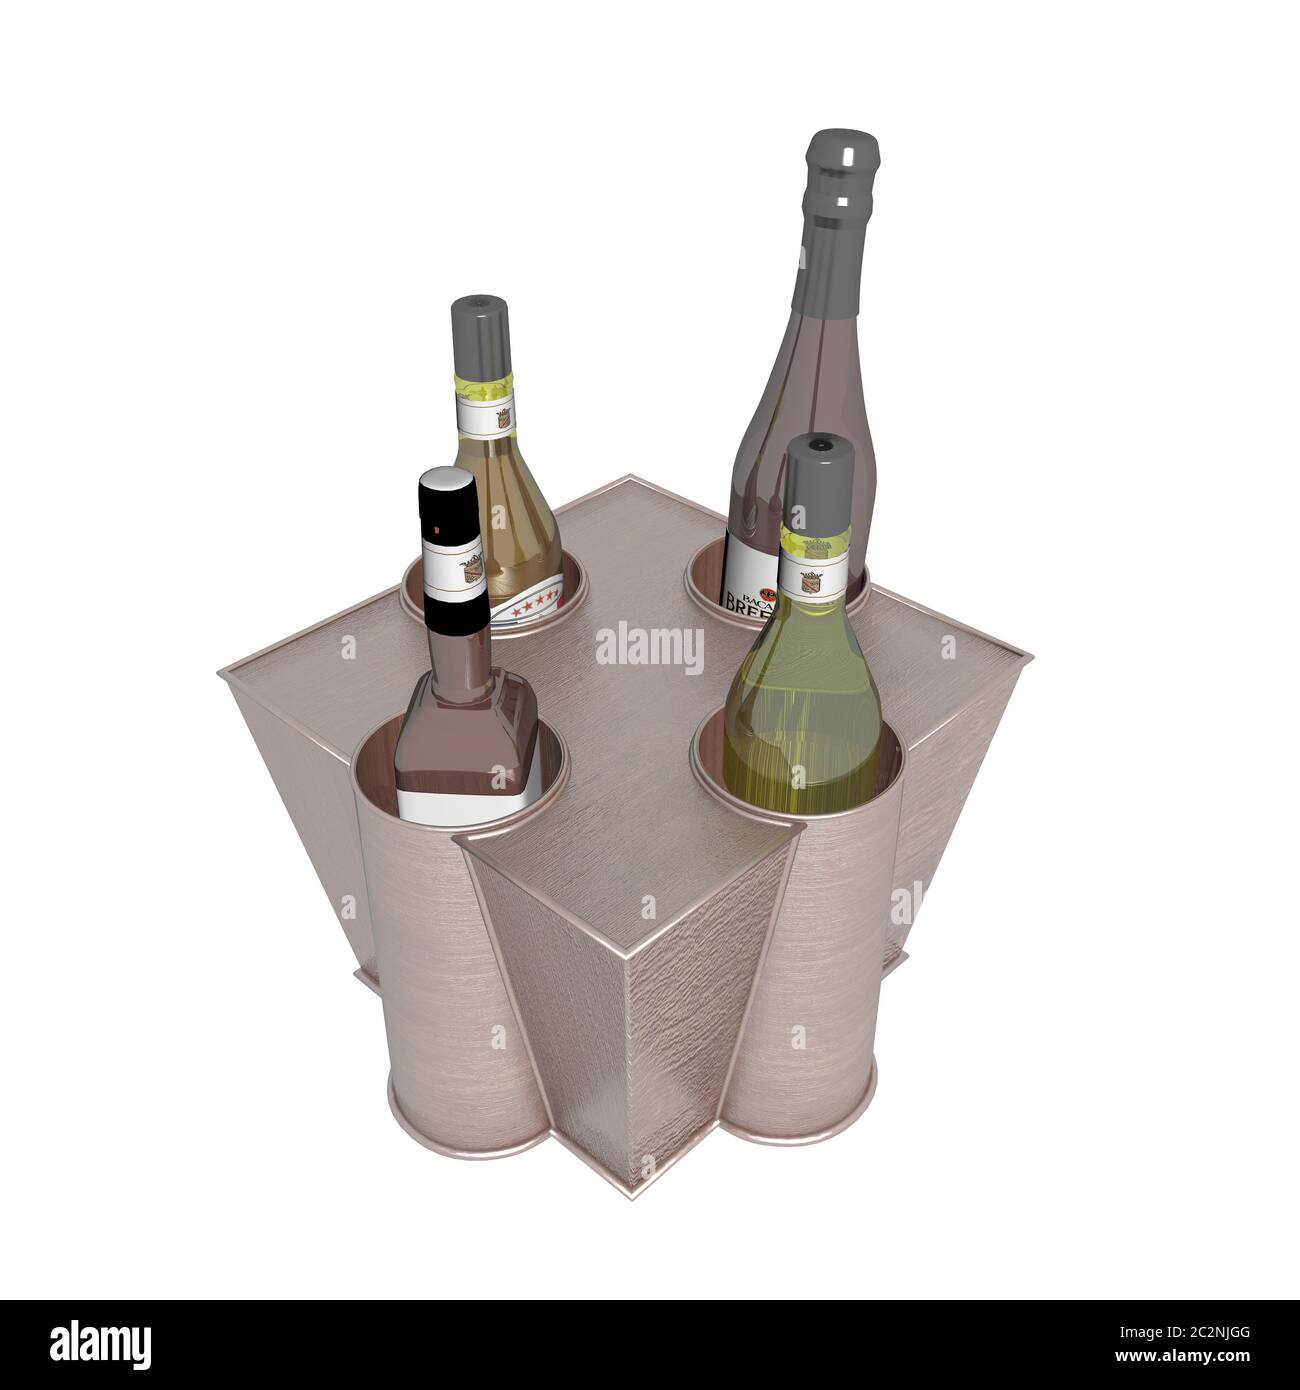 Wine and liquor bottles in a metal holder or rack, 3D illustration, isolated against a white background Stock Photo